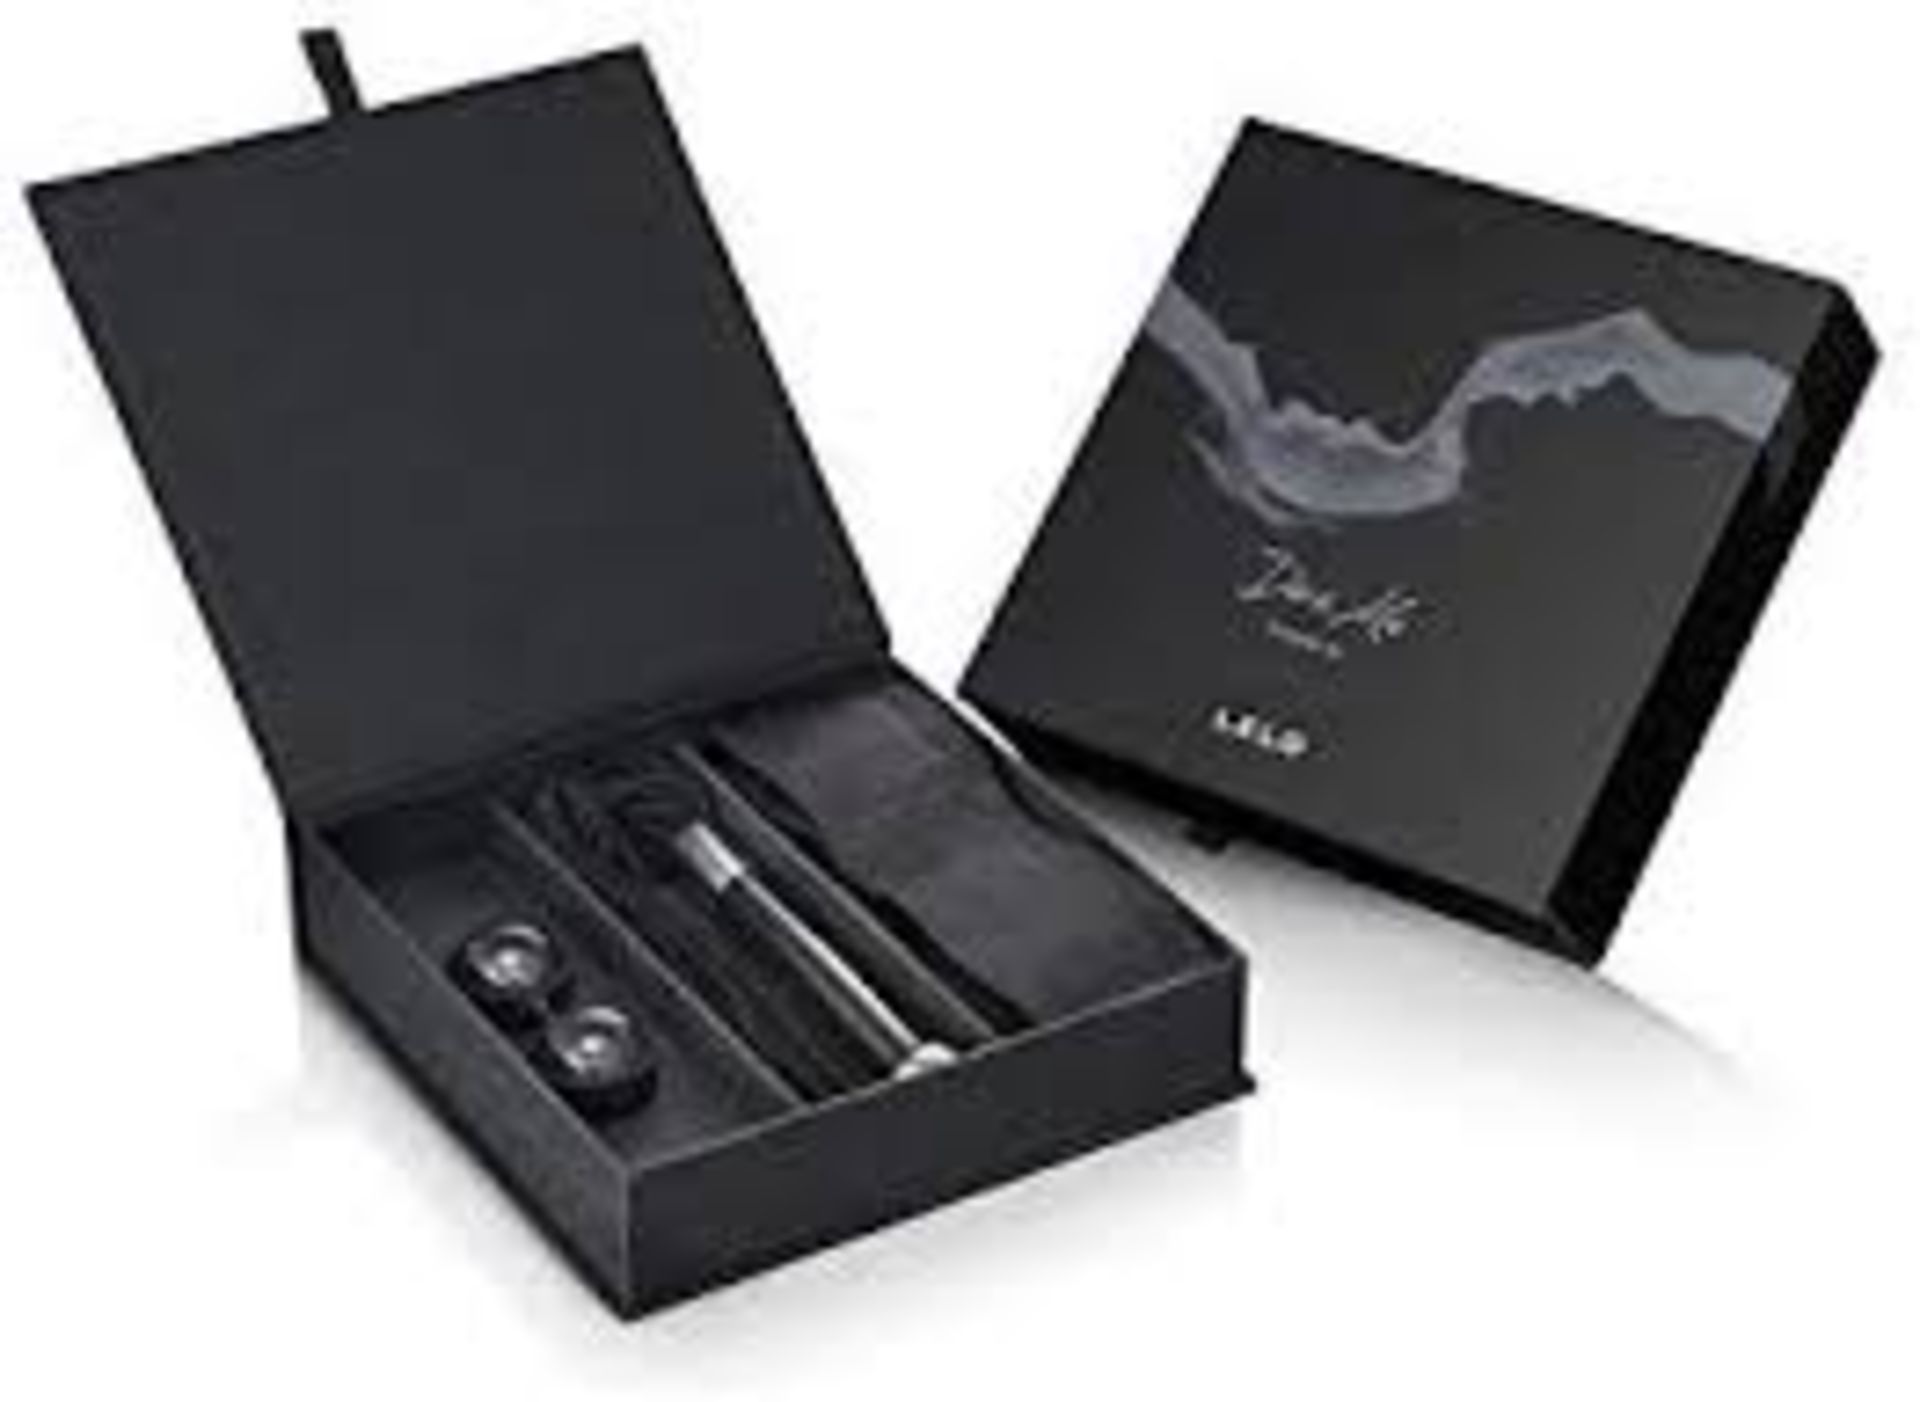 Boxed Lelo Dare Me Pleasure Sets RRP £169 Each (Pictures For Illustration Purposes Only) (Appraisals